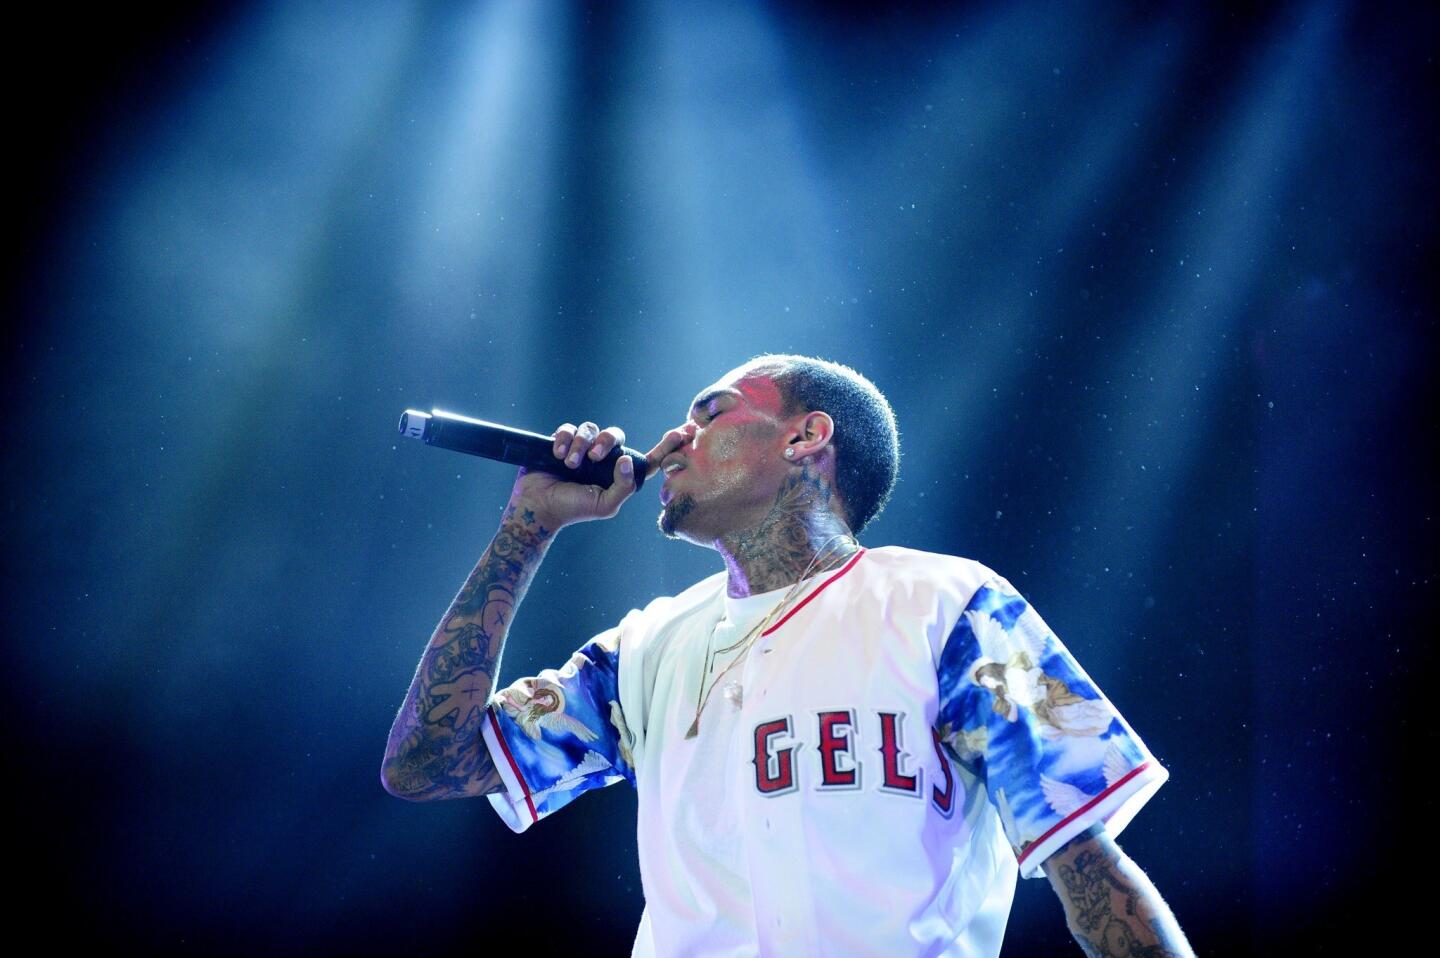 Chris Brown performs at Powerhouse 2013 held at the Honda Center on June 22, 2013 in Anaheim, California.